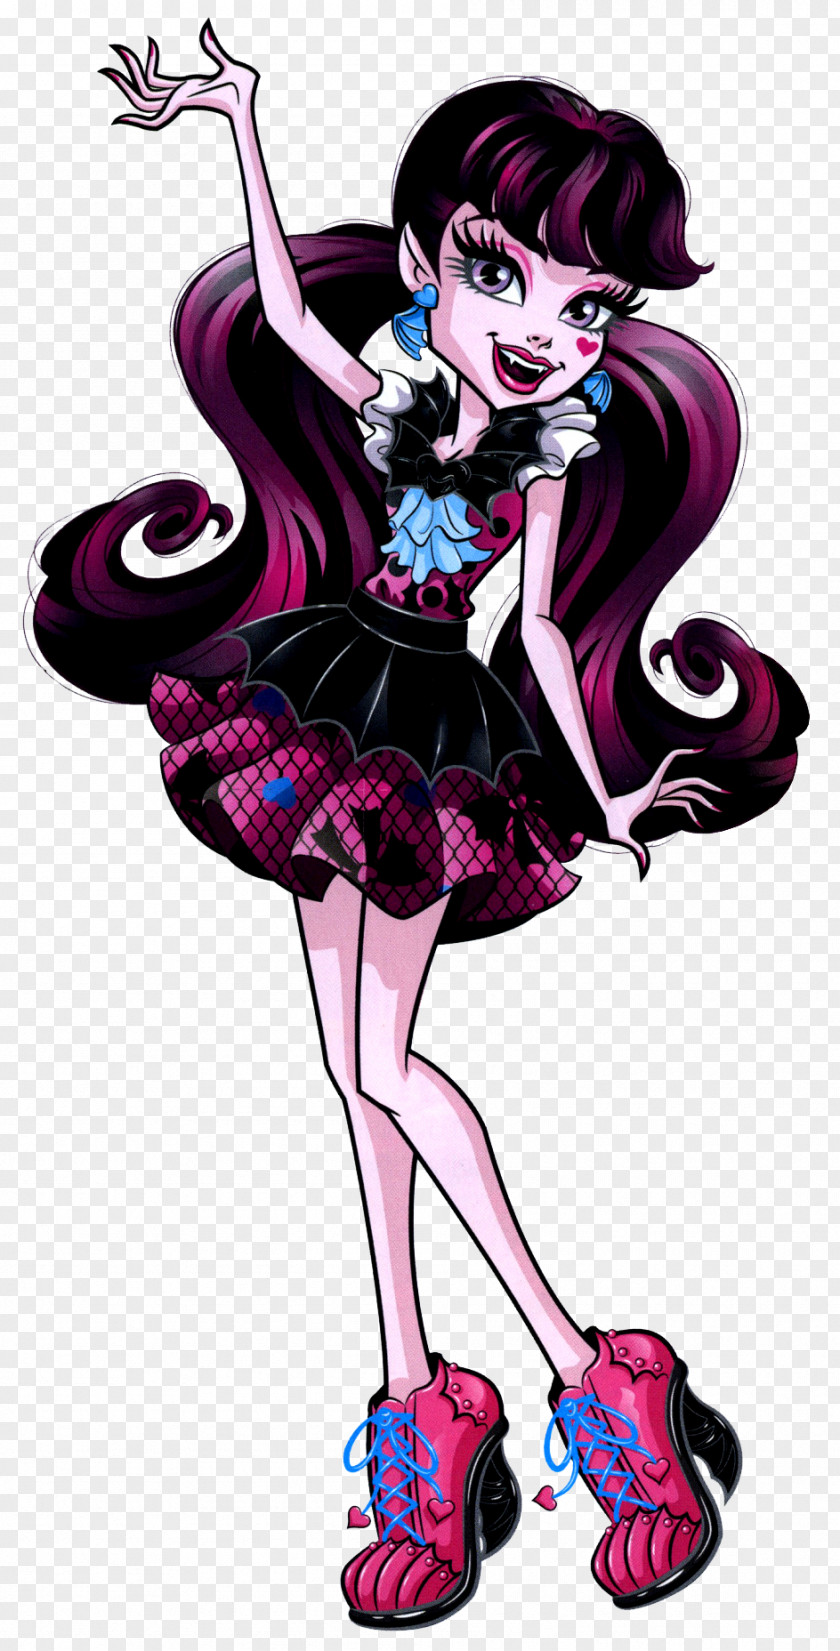 Doll Draculaura Monster High Clawdeen Wolf Cleo DeNile Frankie Stein PNG